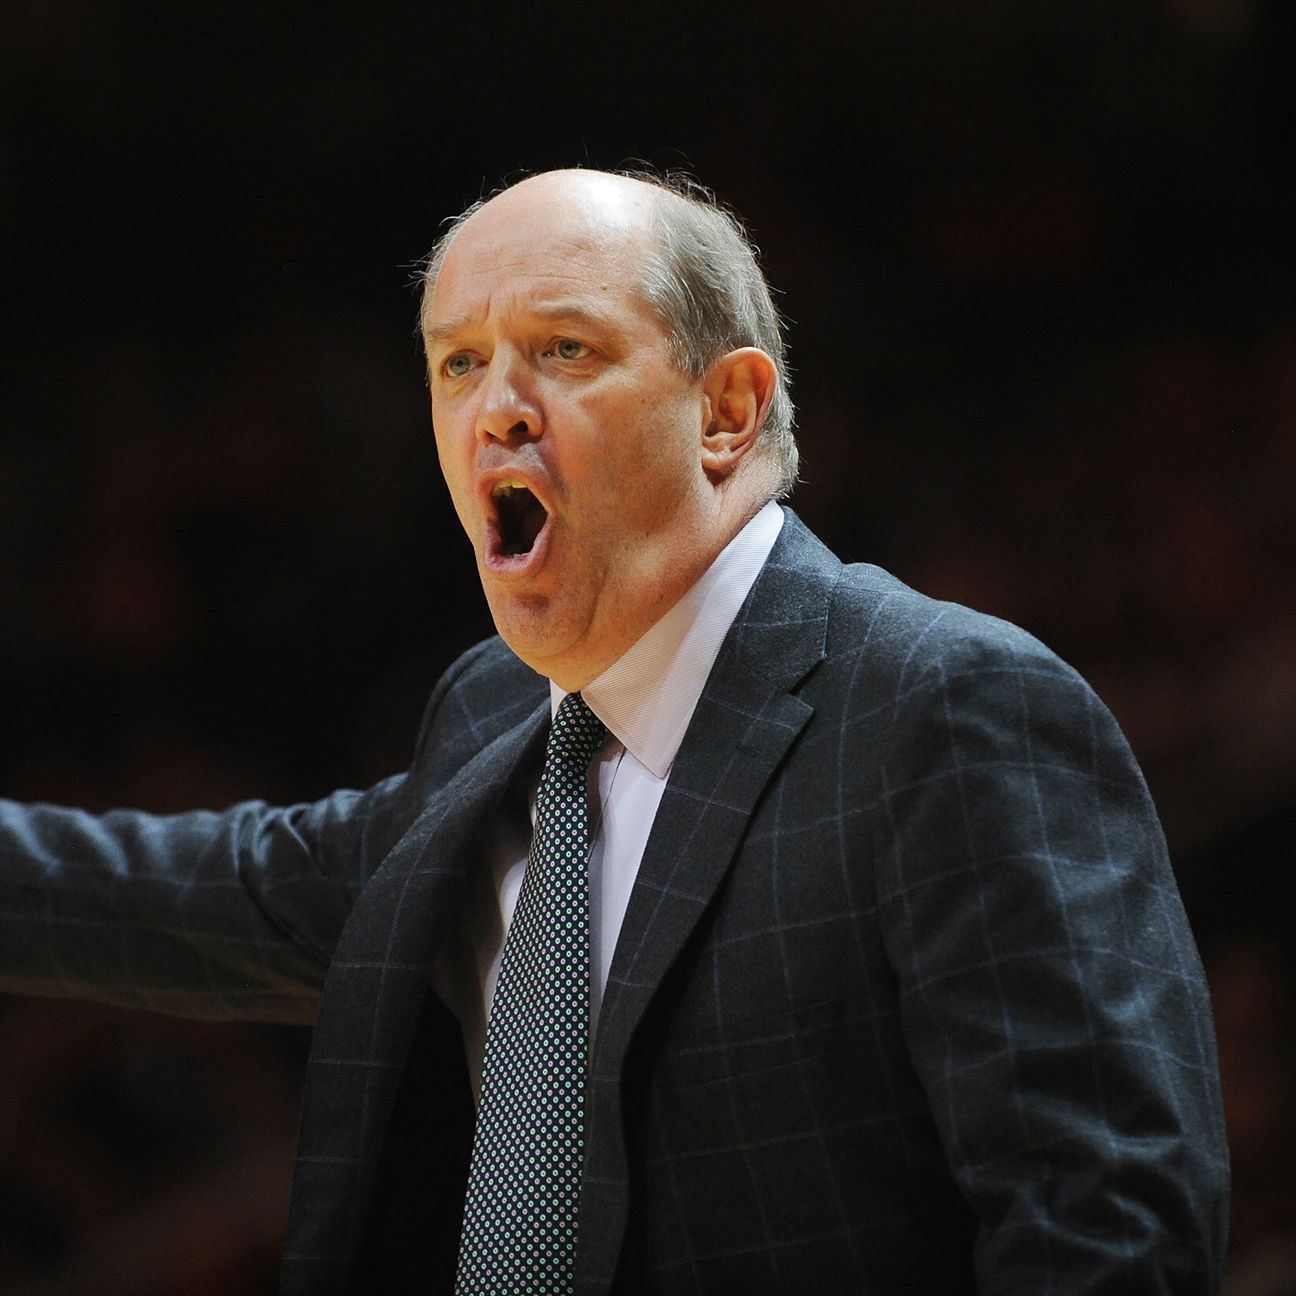 Vanderbilt head coach Kevin Stallings apologizes for berating player after Tennessee game